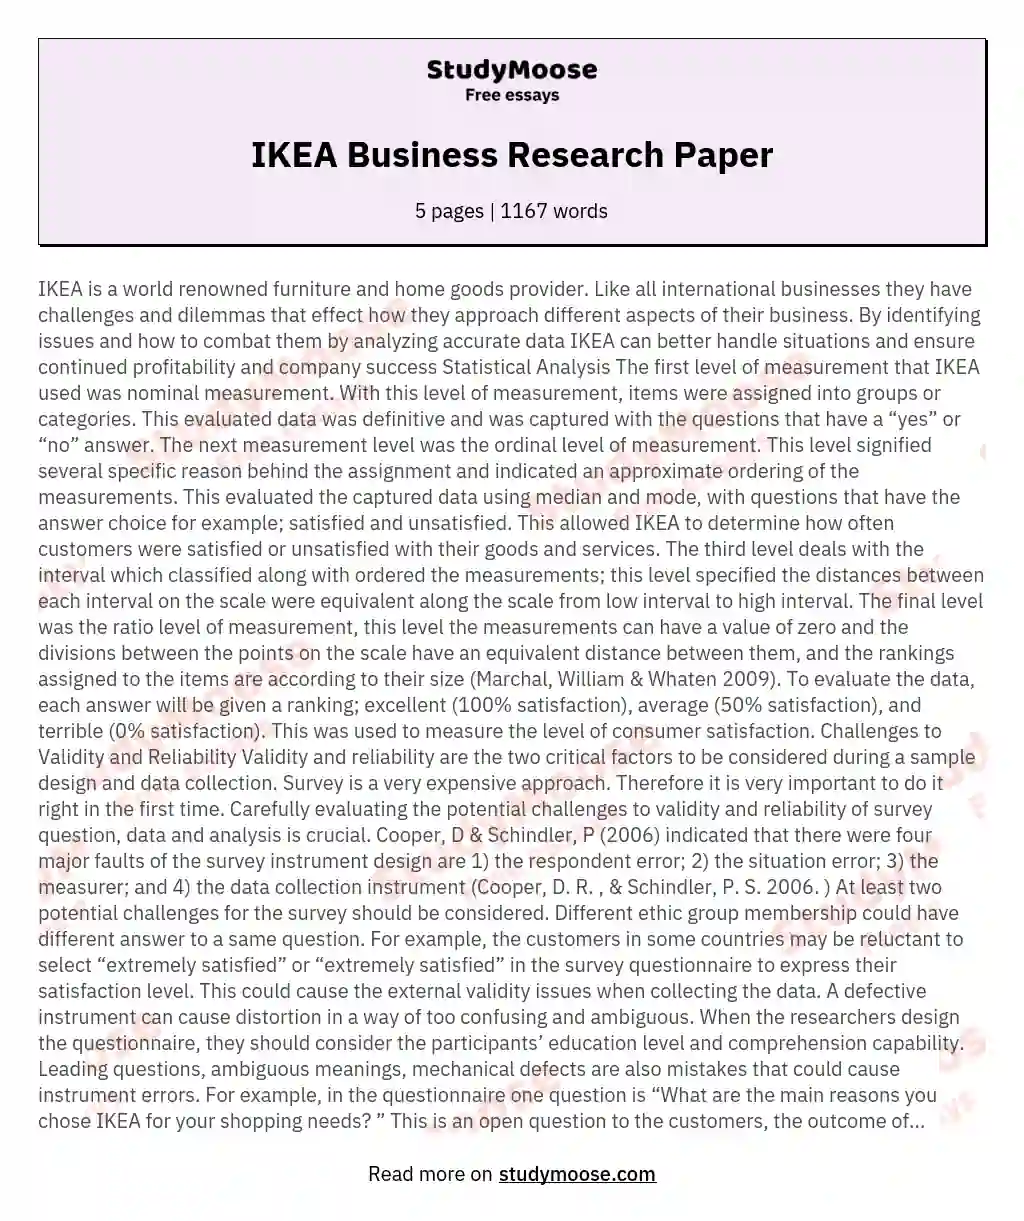 IKEA Business Research Paper essay